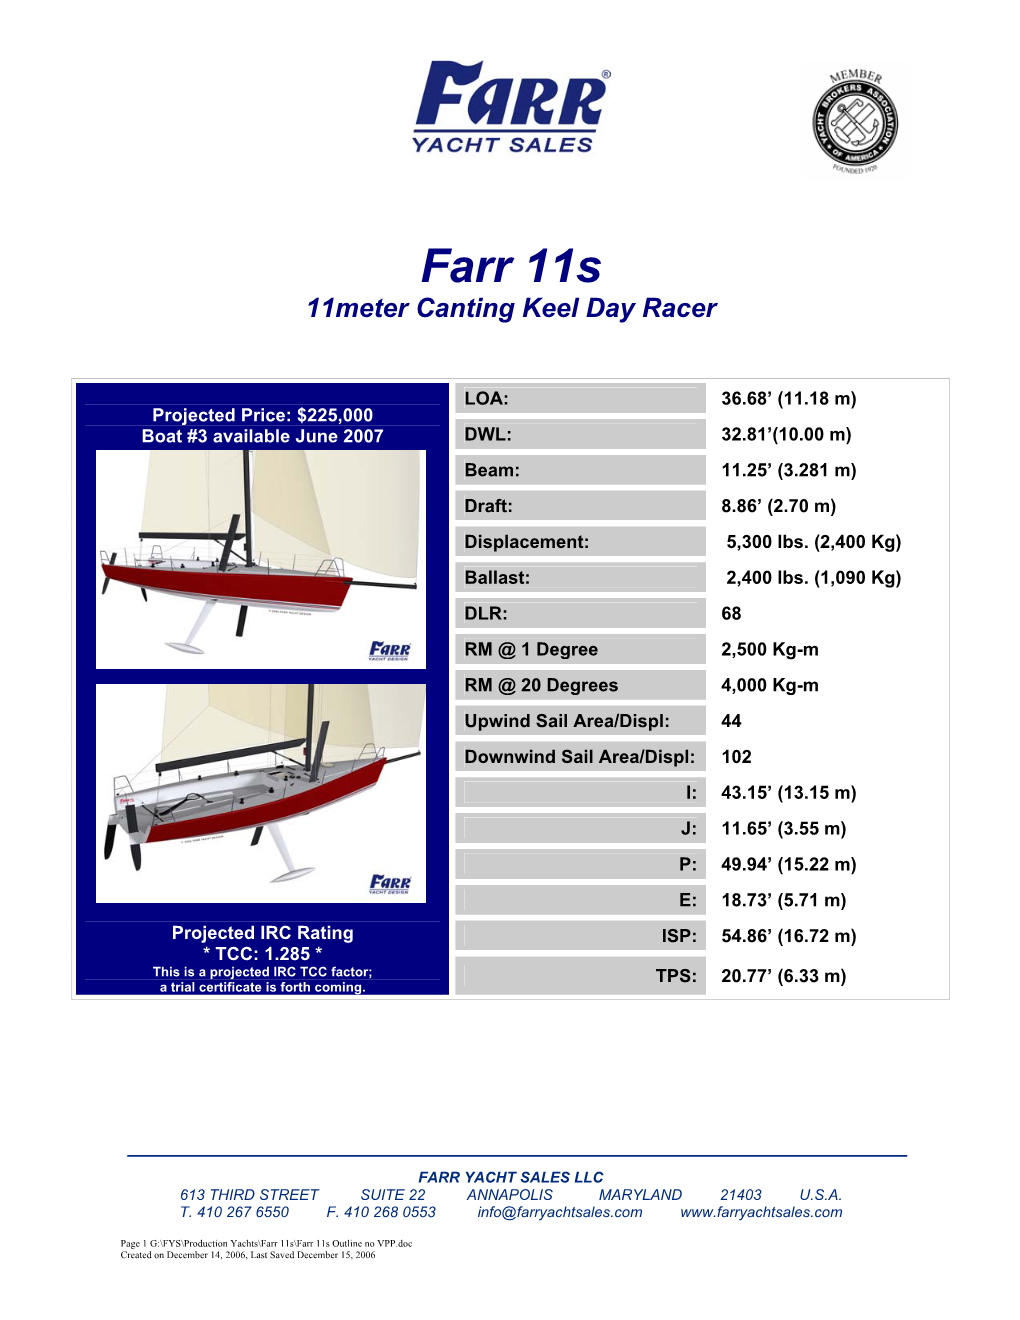 Farr 11S 11Meter Canting Keel Day Racer